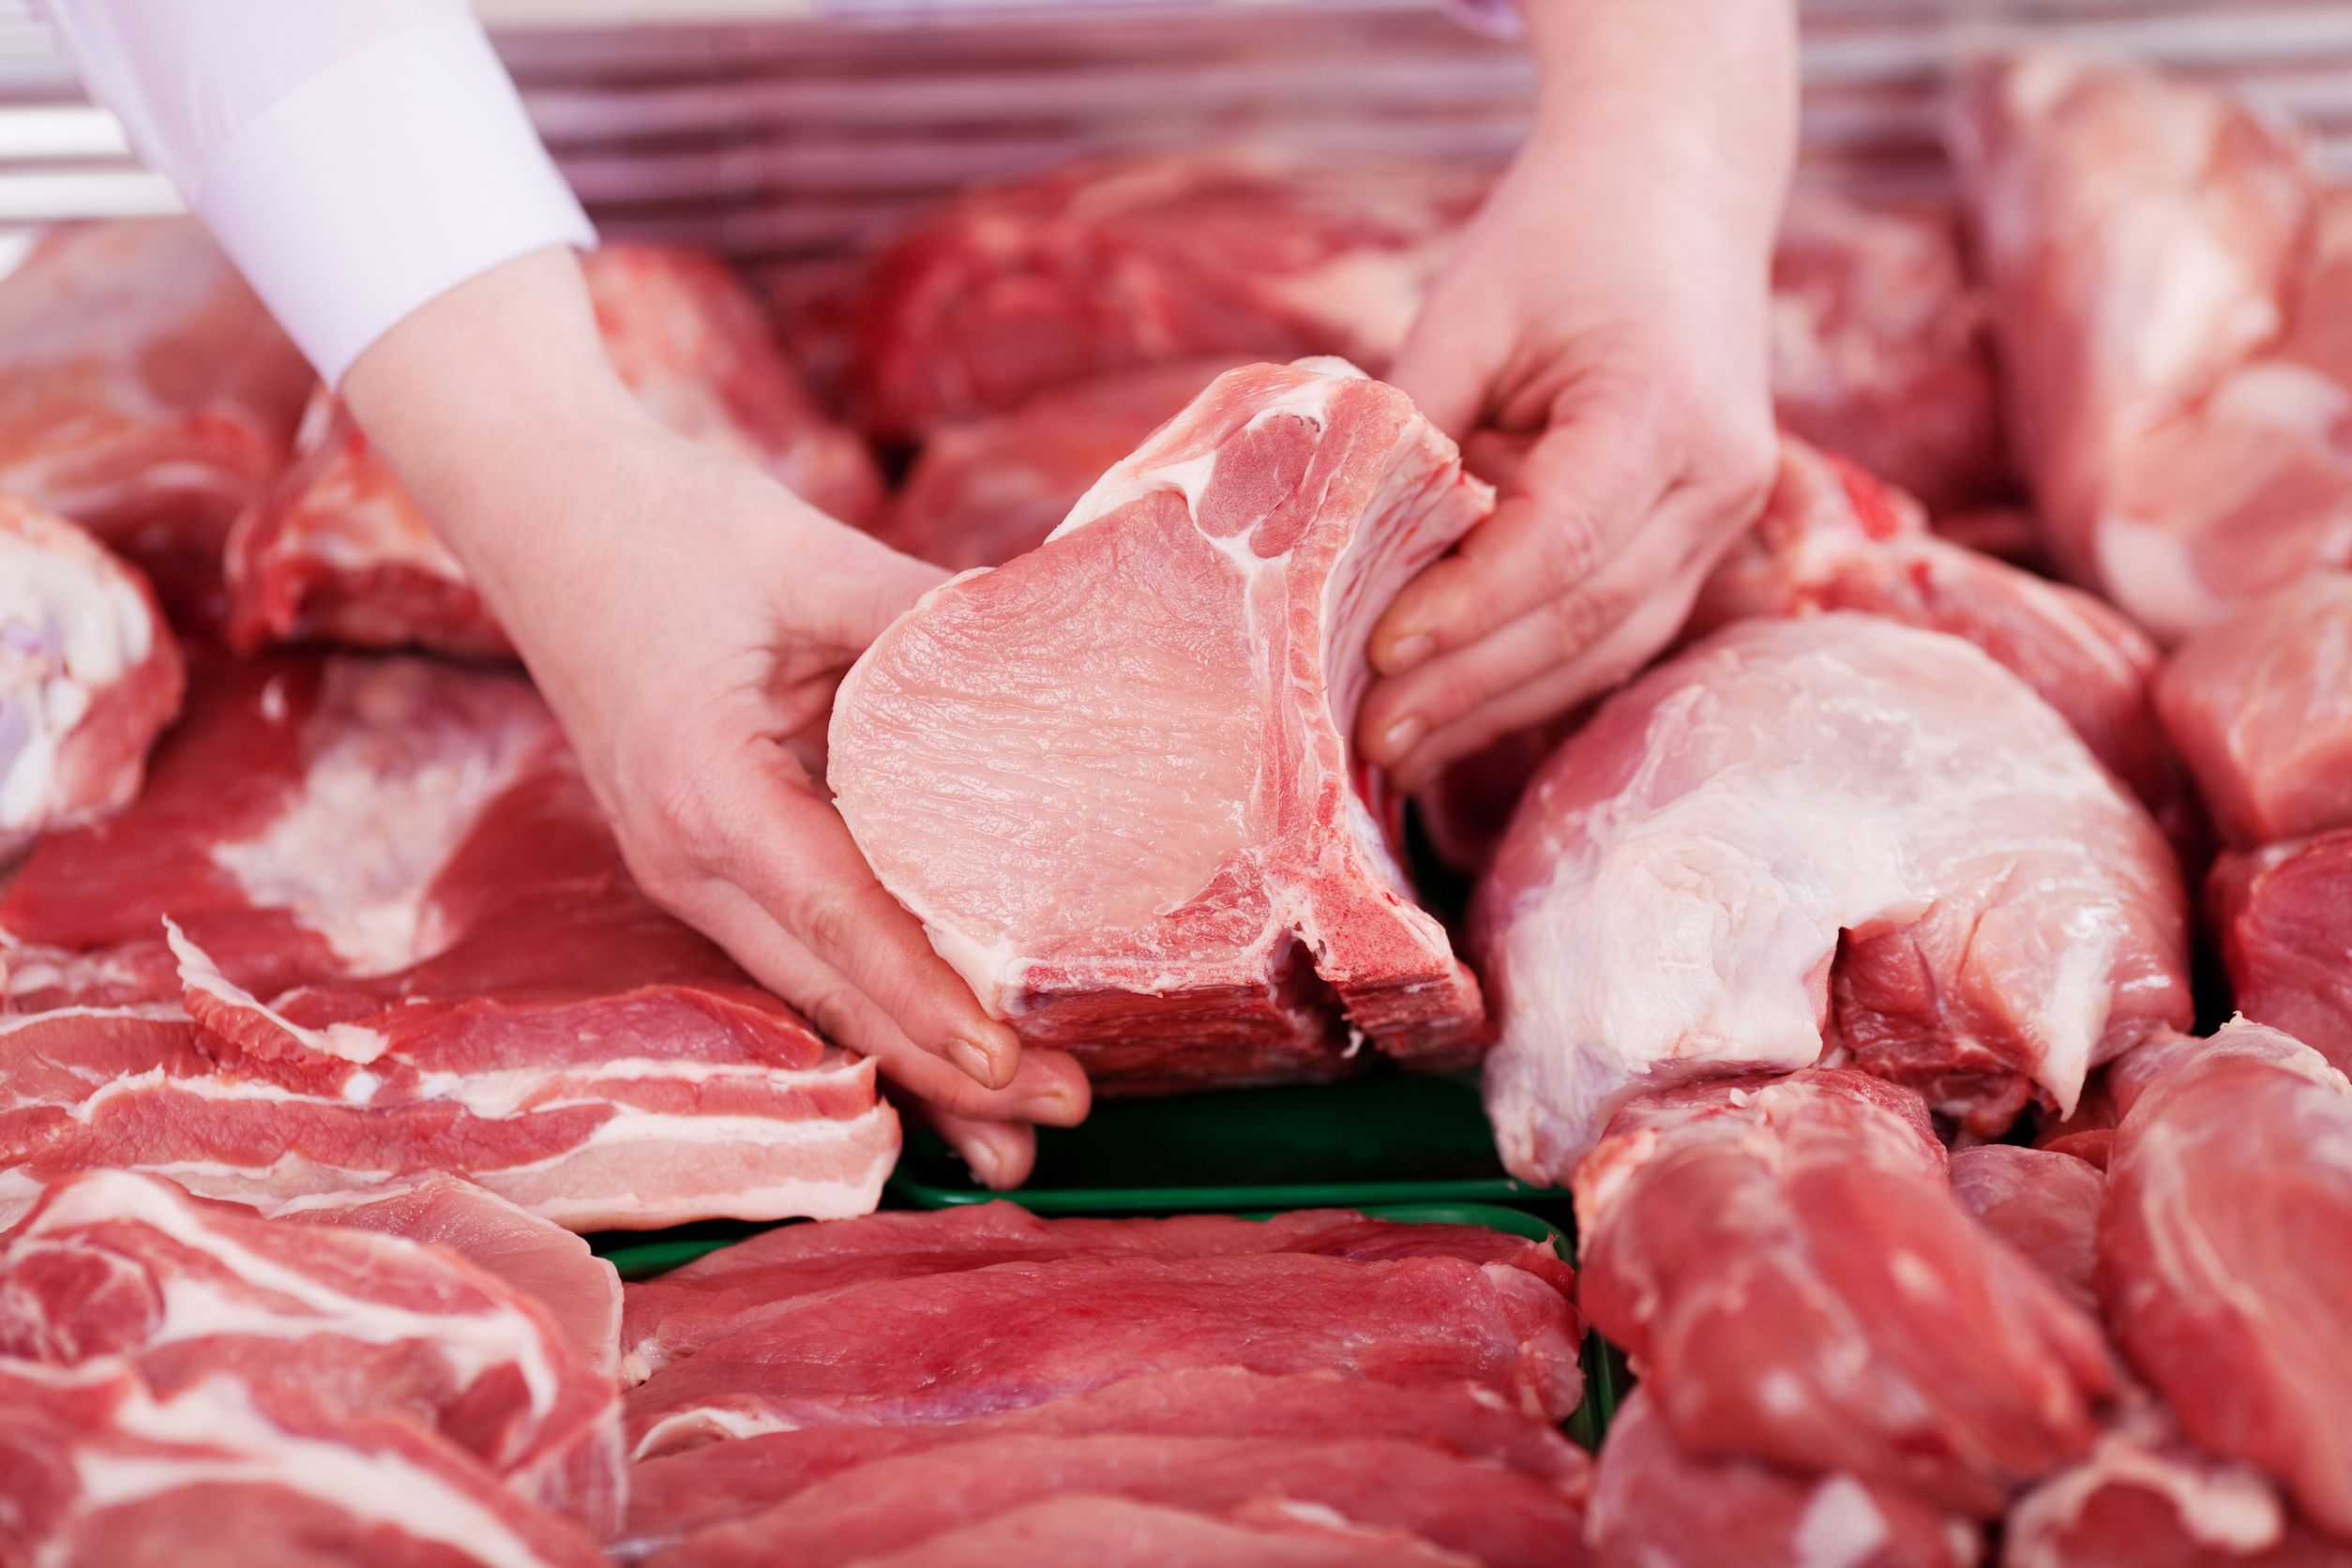 Why You Should Purchase Meat from an Online Supplier